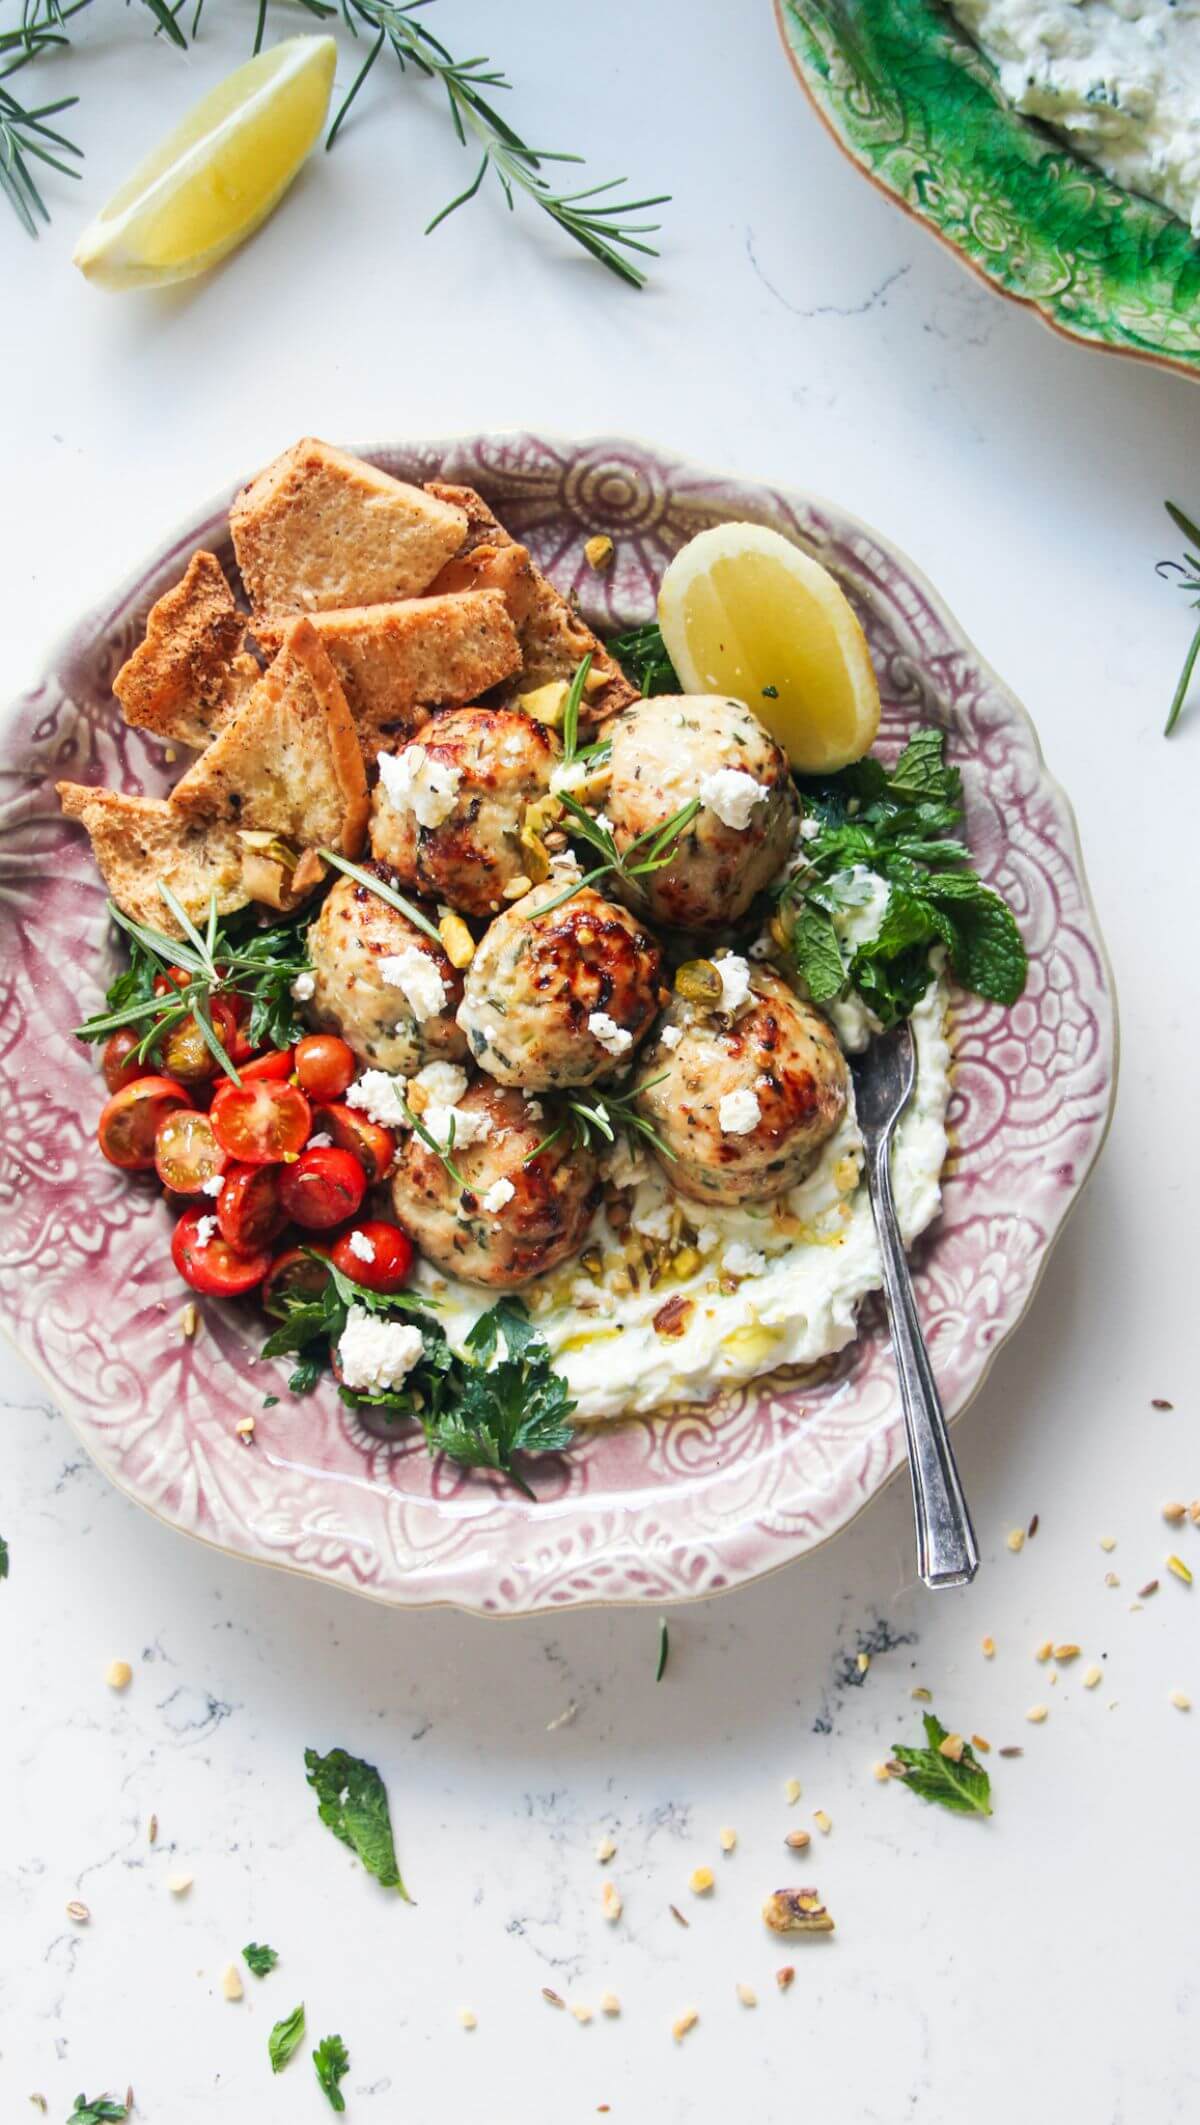 Fresh, zesty, juicy Greek chicken meatballs are a super easy, versatile 20 minute meal. Piled onto quick tzatziki sauce, topped with creamy feta, cherry tomatoes and herbs, they make a wonderful weeknight winner the whole family will love.